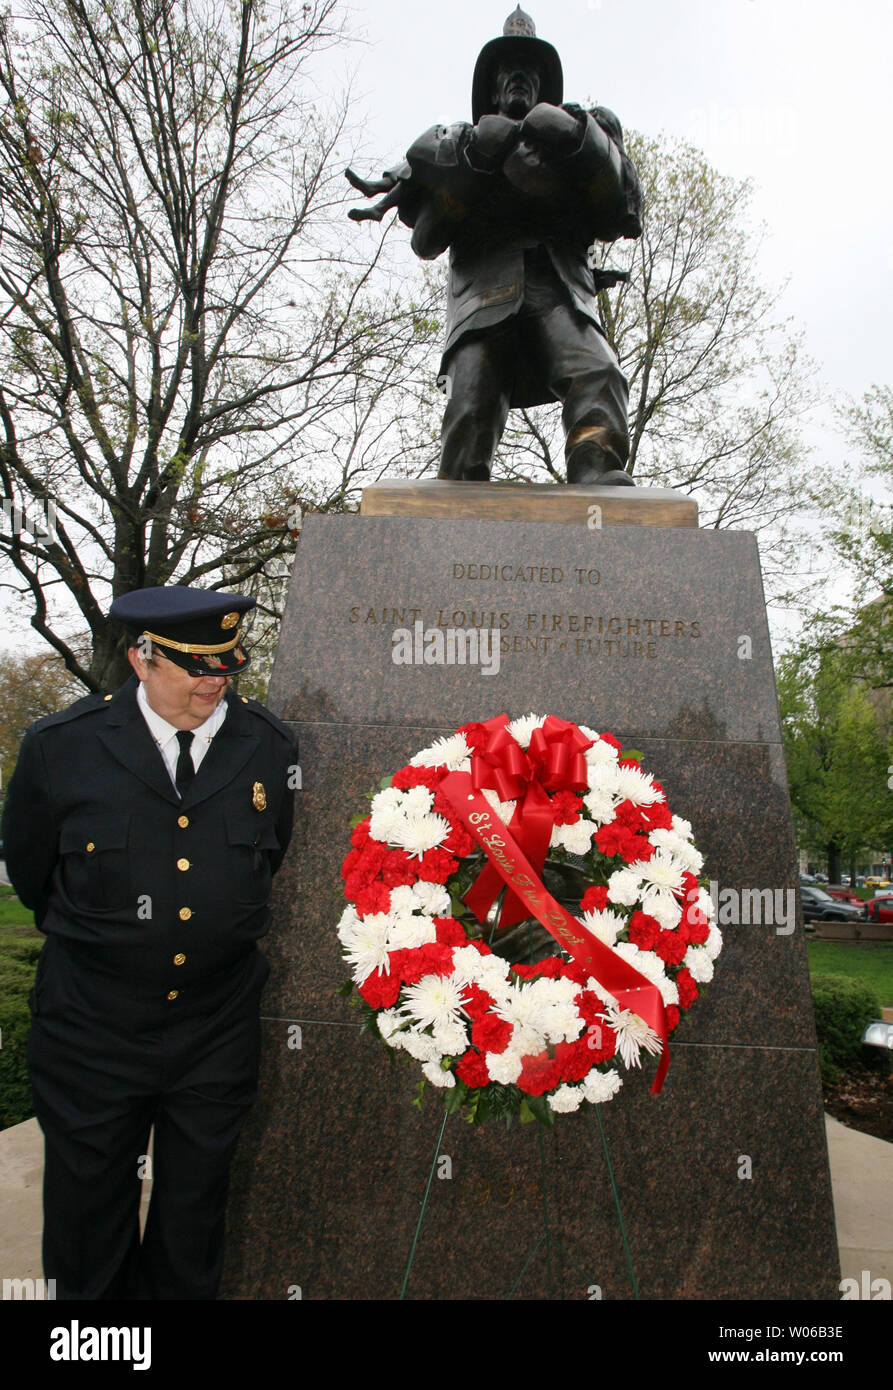 St. Louis Battalion Chief Chris Cross inspects flowers placed at the foot of the firefighters memorial statue in St. Louis on May 3, 2007. A service was held to remember St. Louis firefighters Derek Martin and Rob Morrison who lost their lives in a fire, on this date in 2002. The memorial service included the reading of all 165 St. Louis firefighters names who have died in the line of service for the last 150 years. (UPI Photo/Bill Greenblatt) Stock Photo